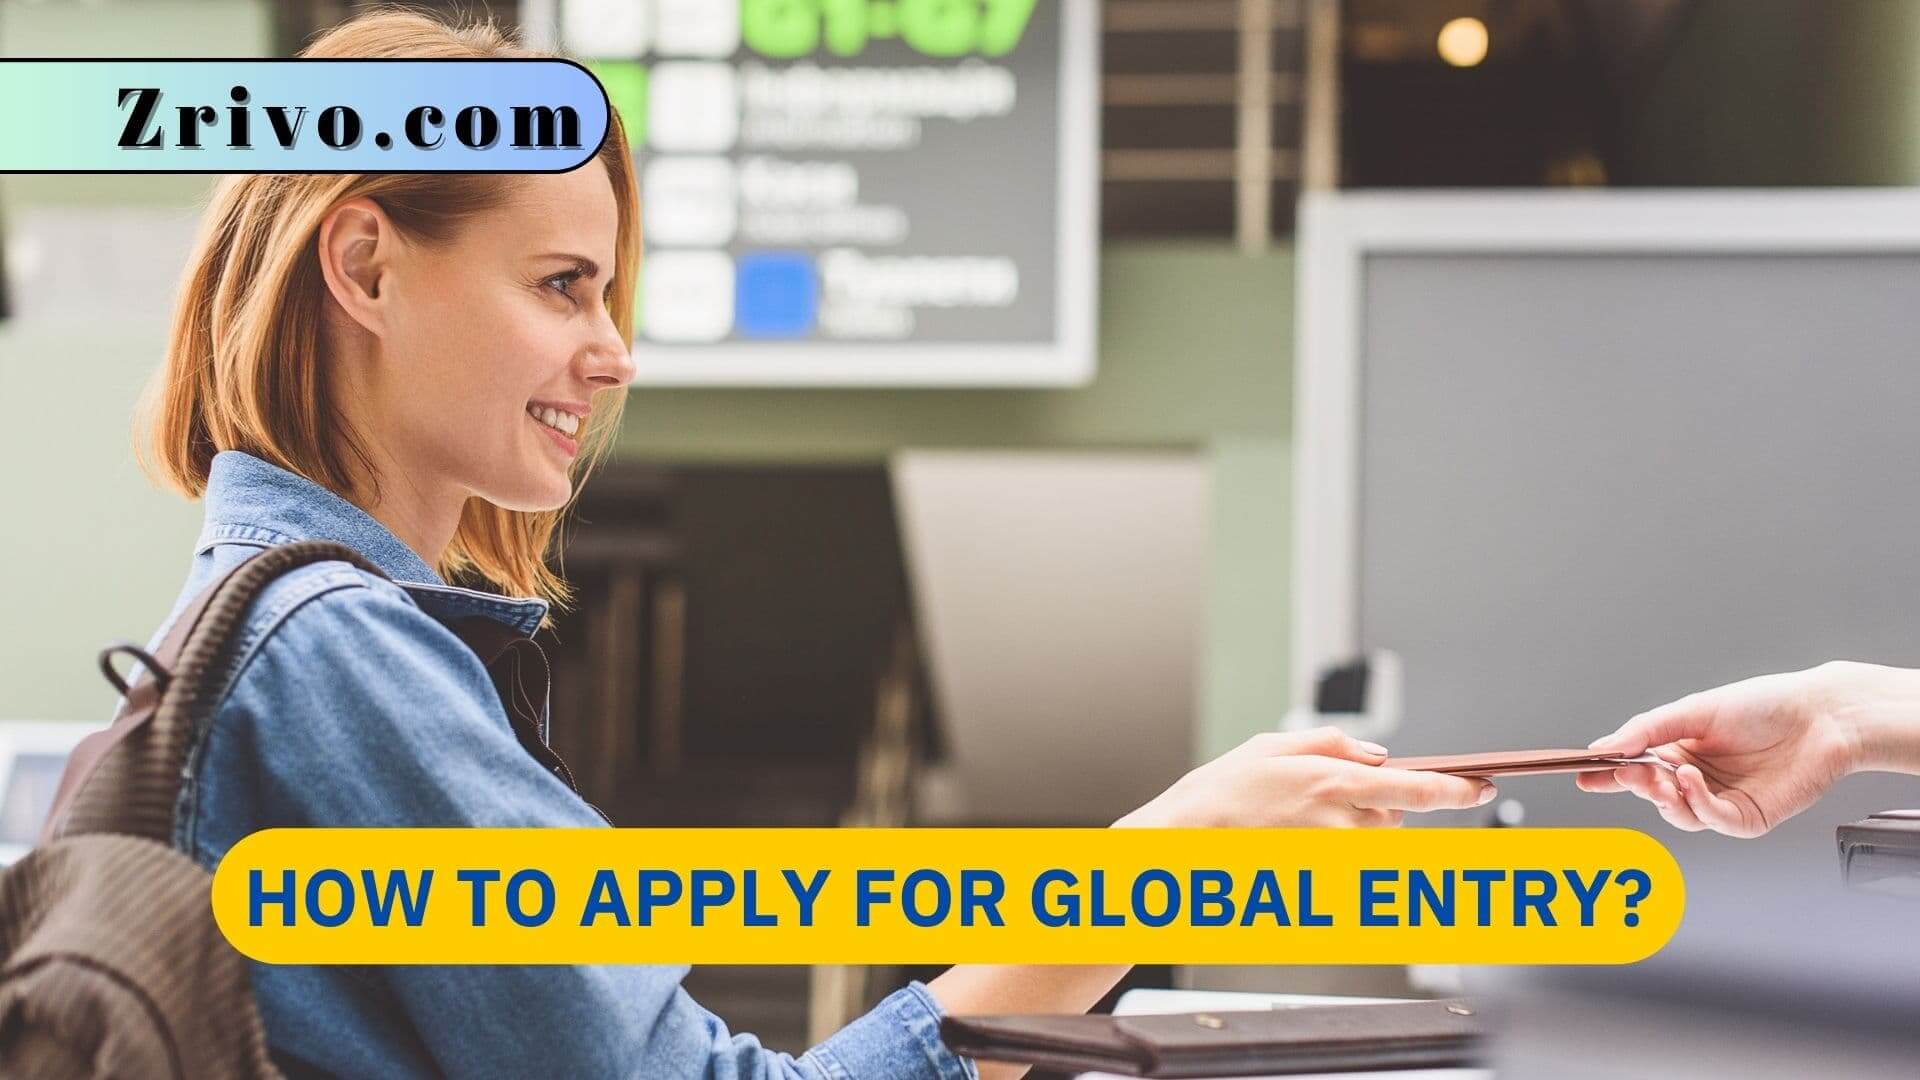 How to Apply For Global Entry